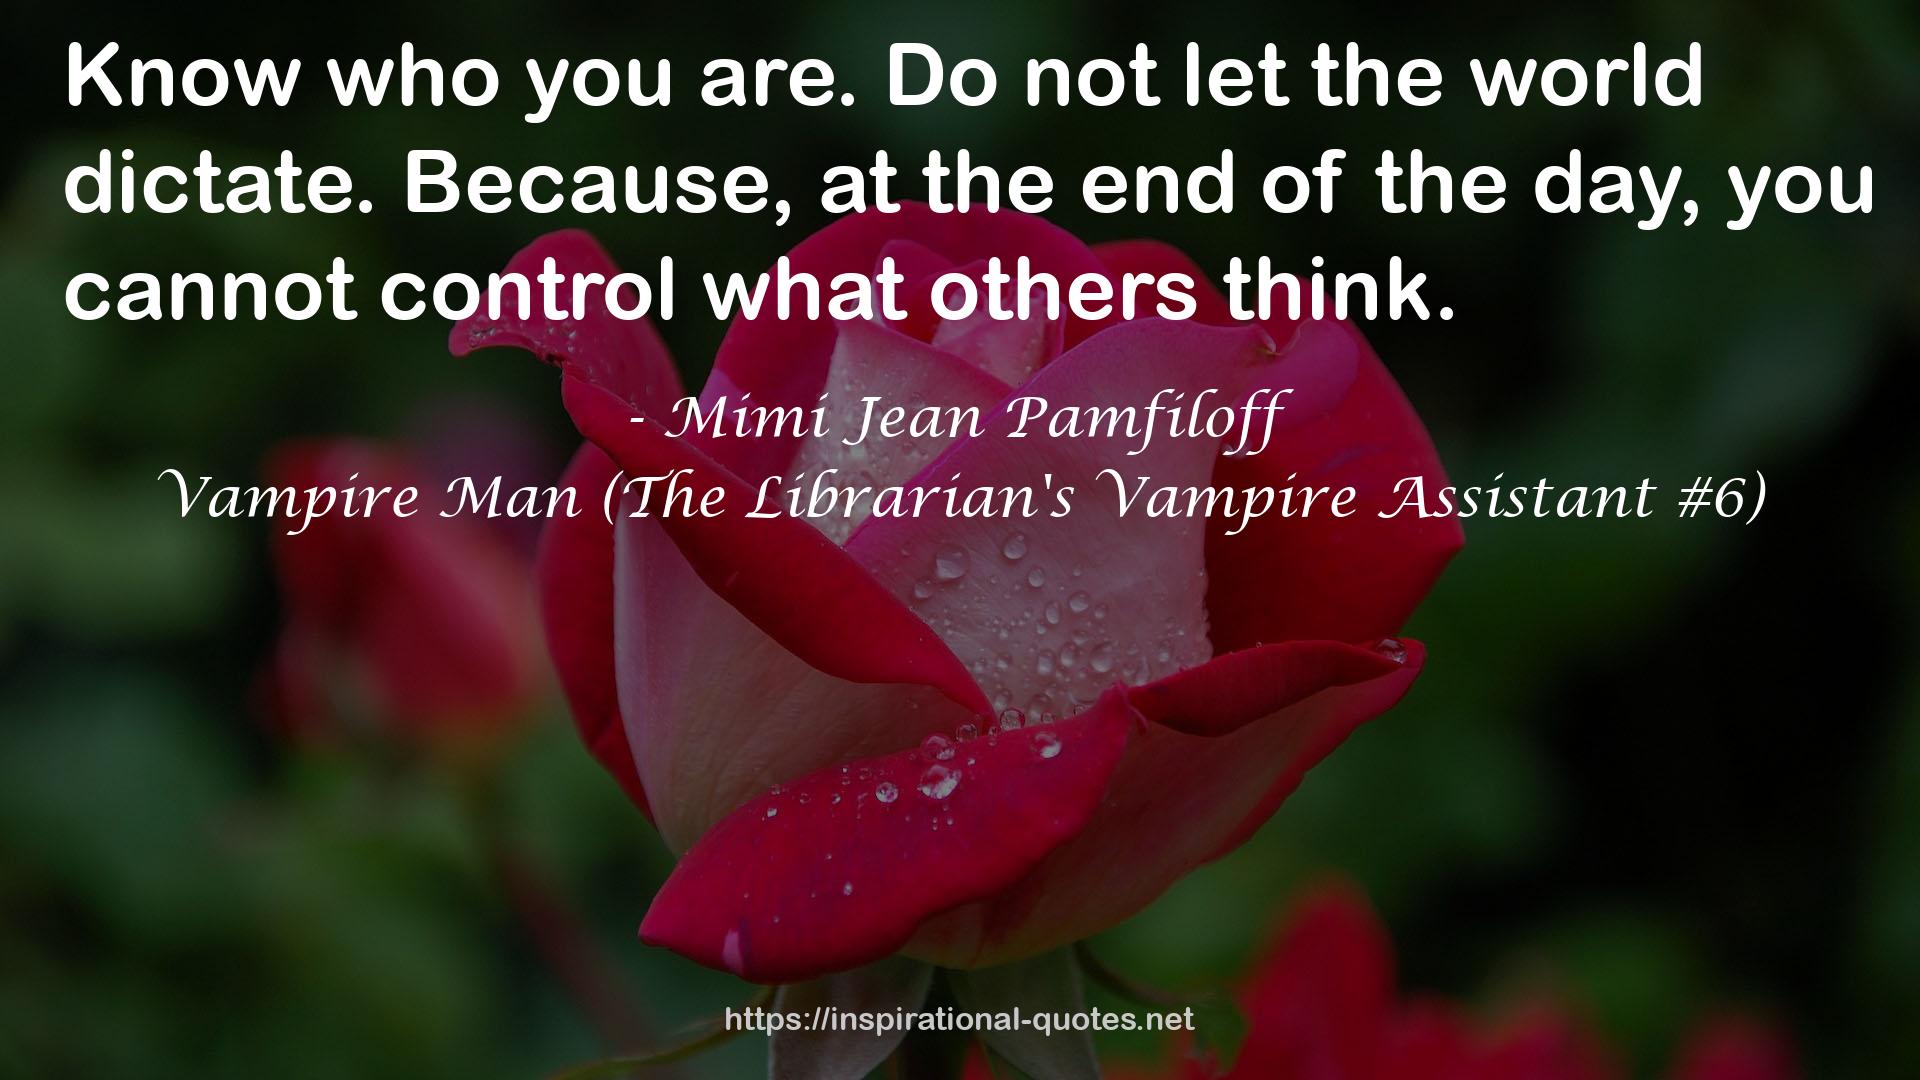 Vampire Man (The Librarian's Vampire Assistant #6) QUOTES